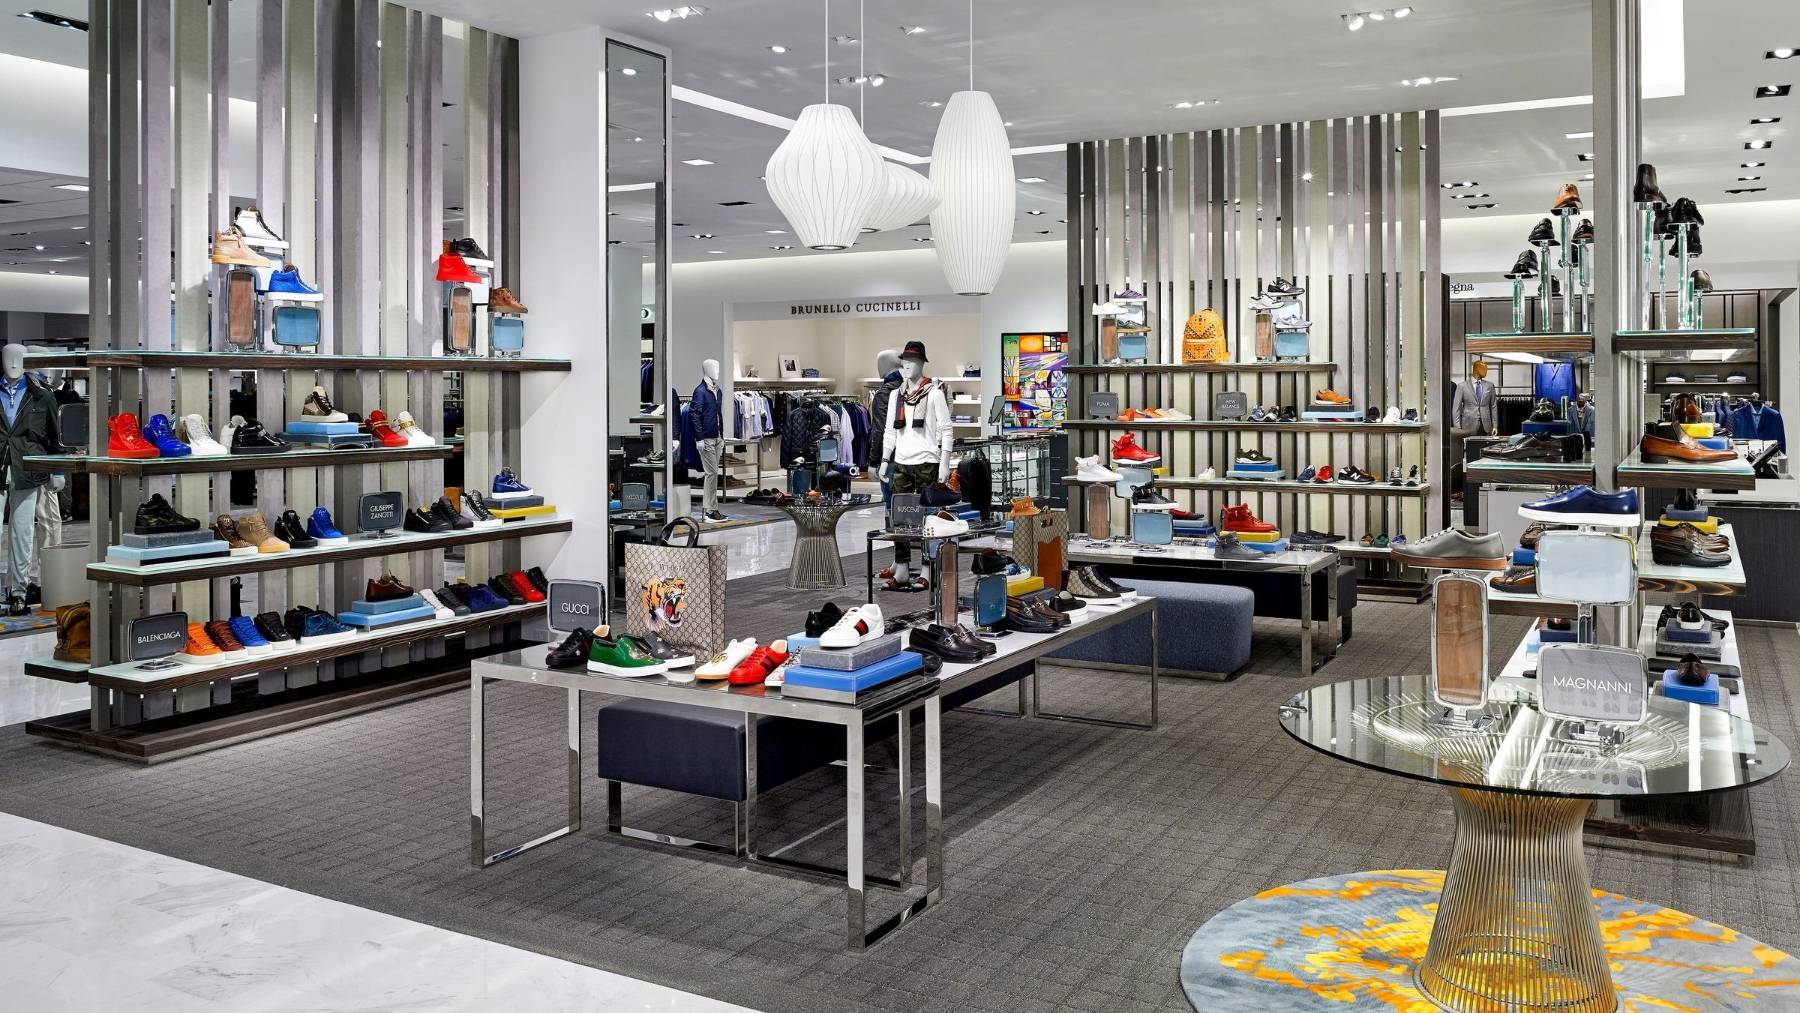 Neiman Marcus is investing $200 million into the redesign of stores like its Forth Worth, Texas location